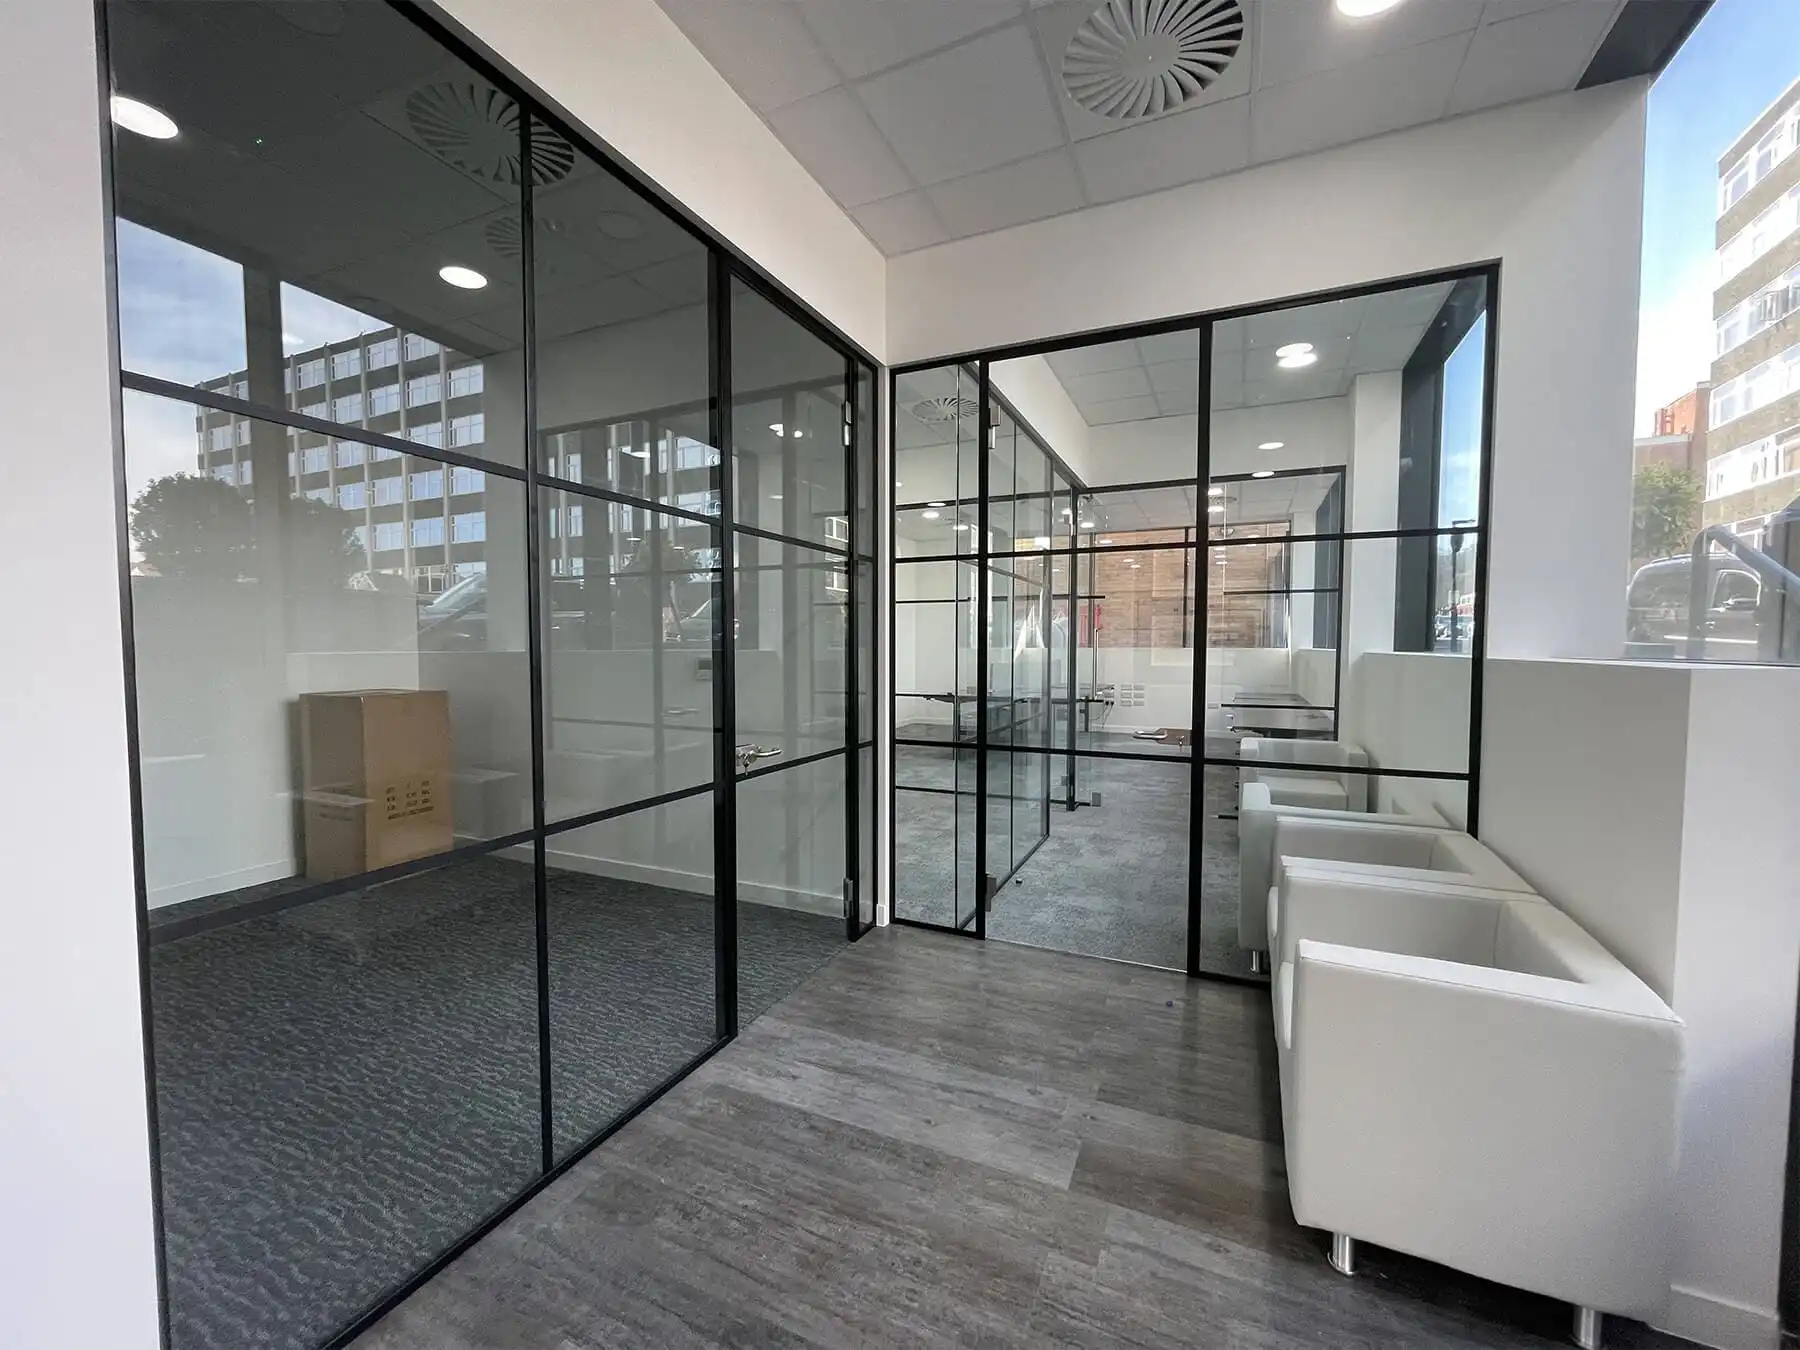 Carter Bond office space with Black framed glass partitions